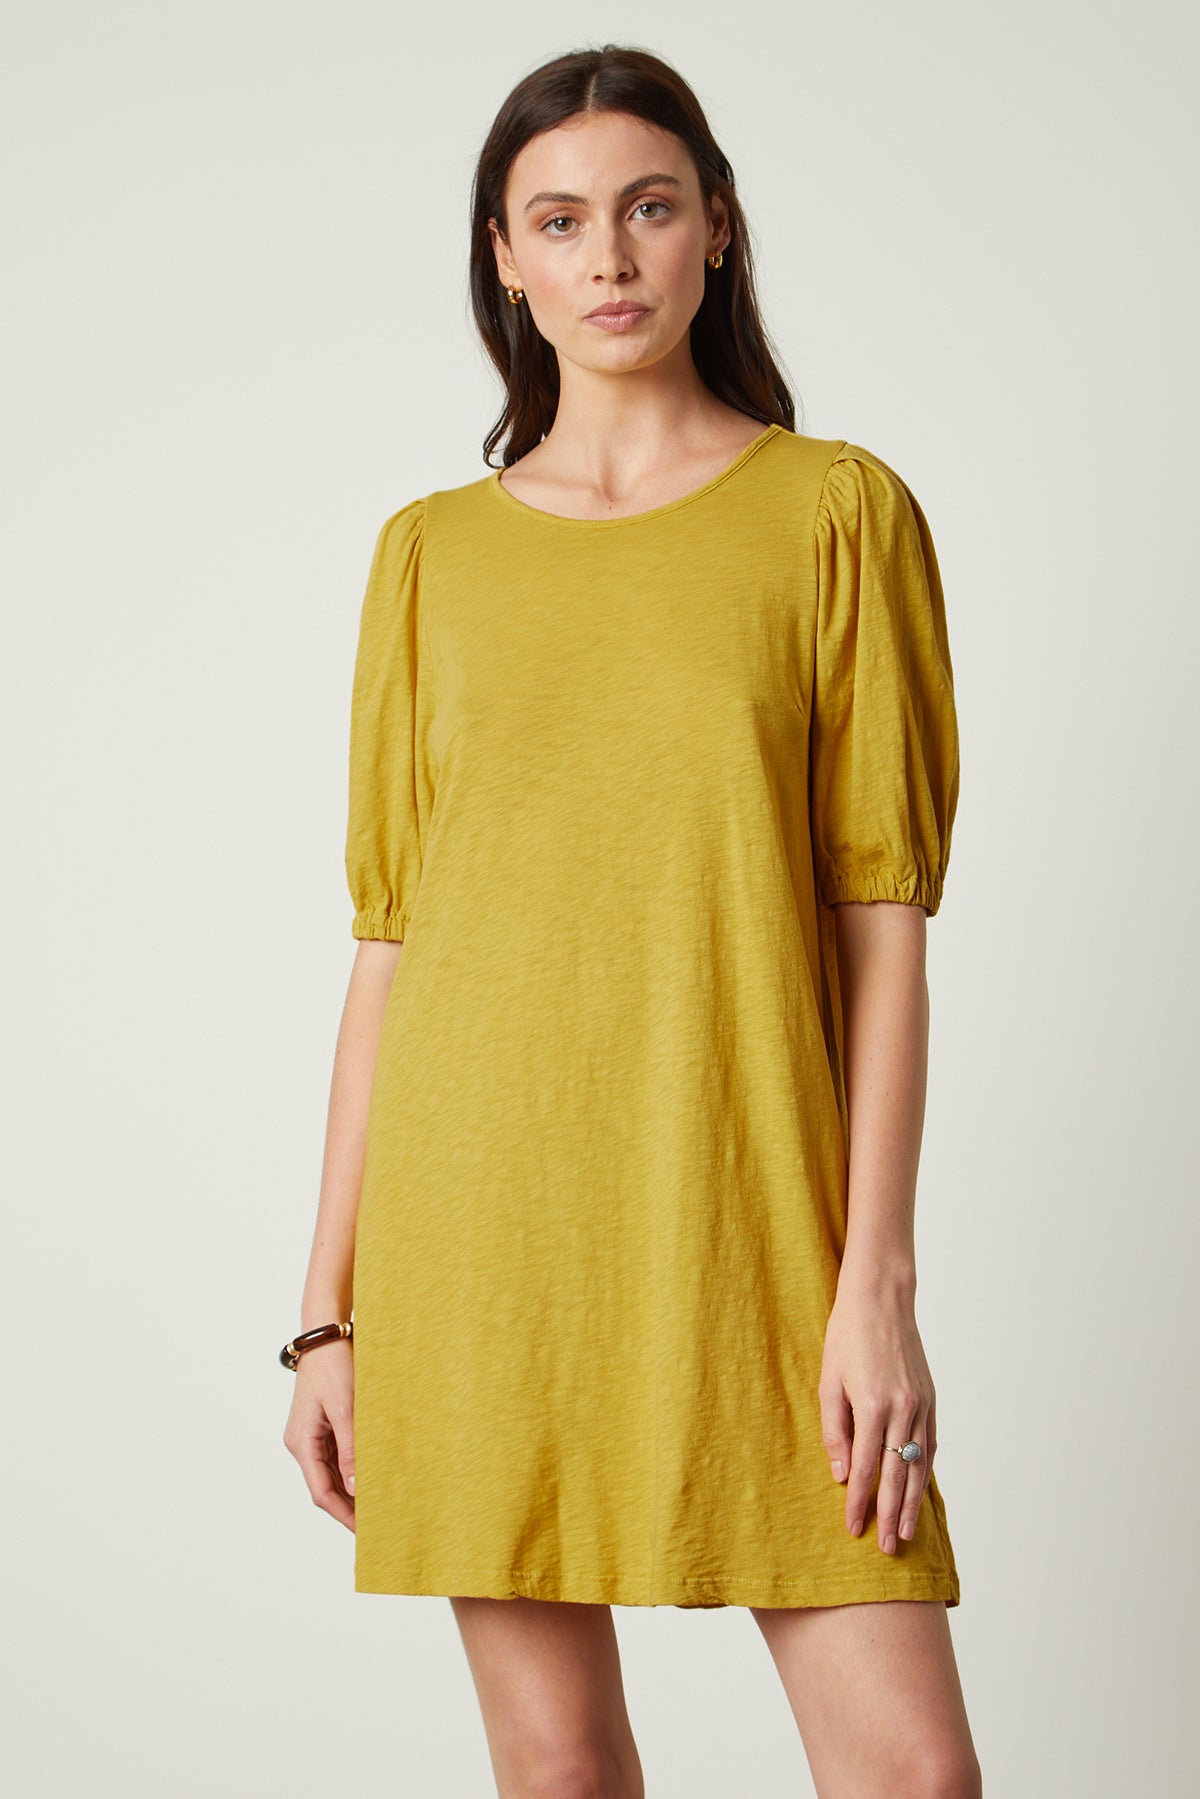 Meghan Dress in buttercup with puff sleeves front-26022634389697